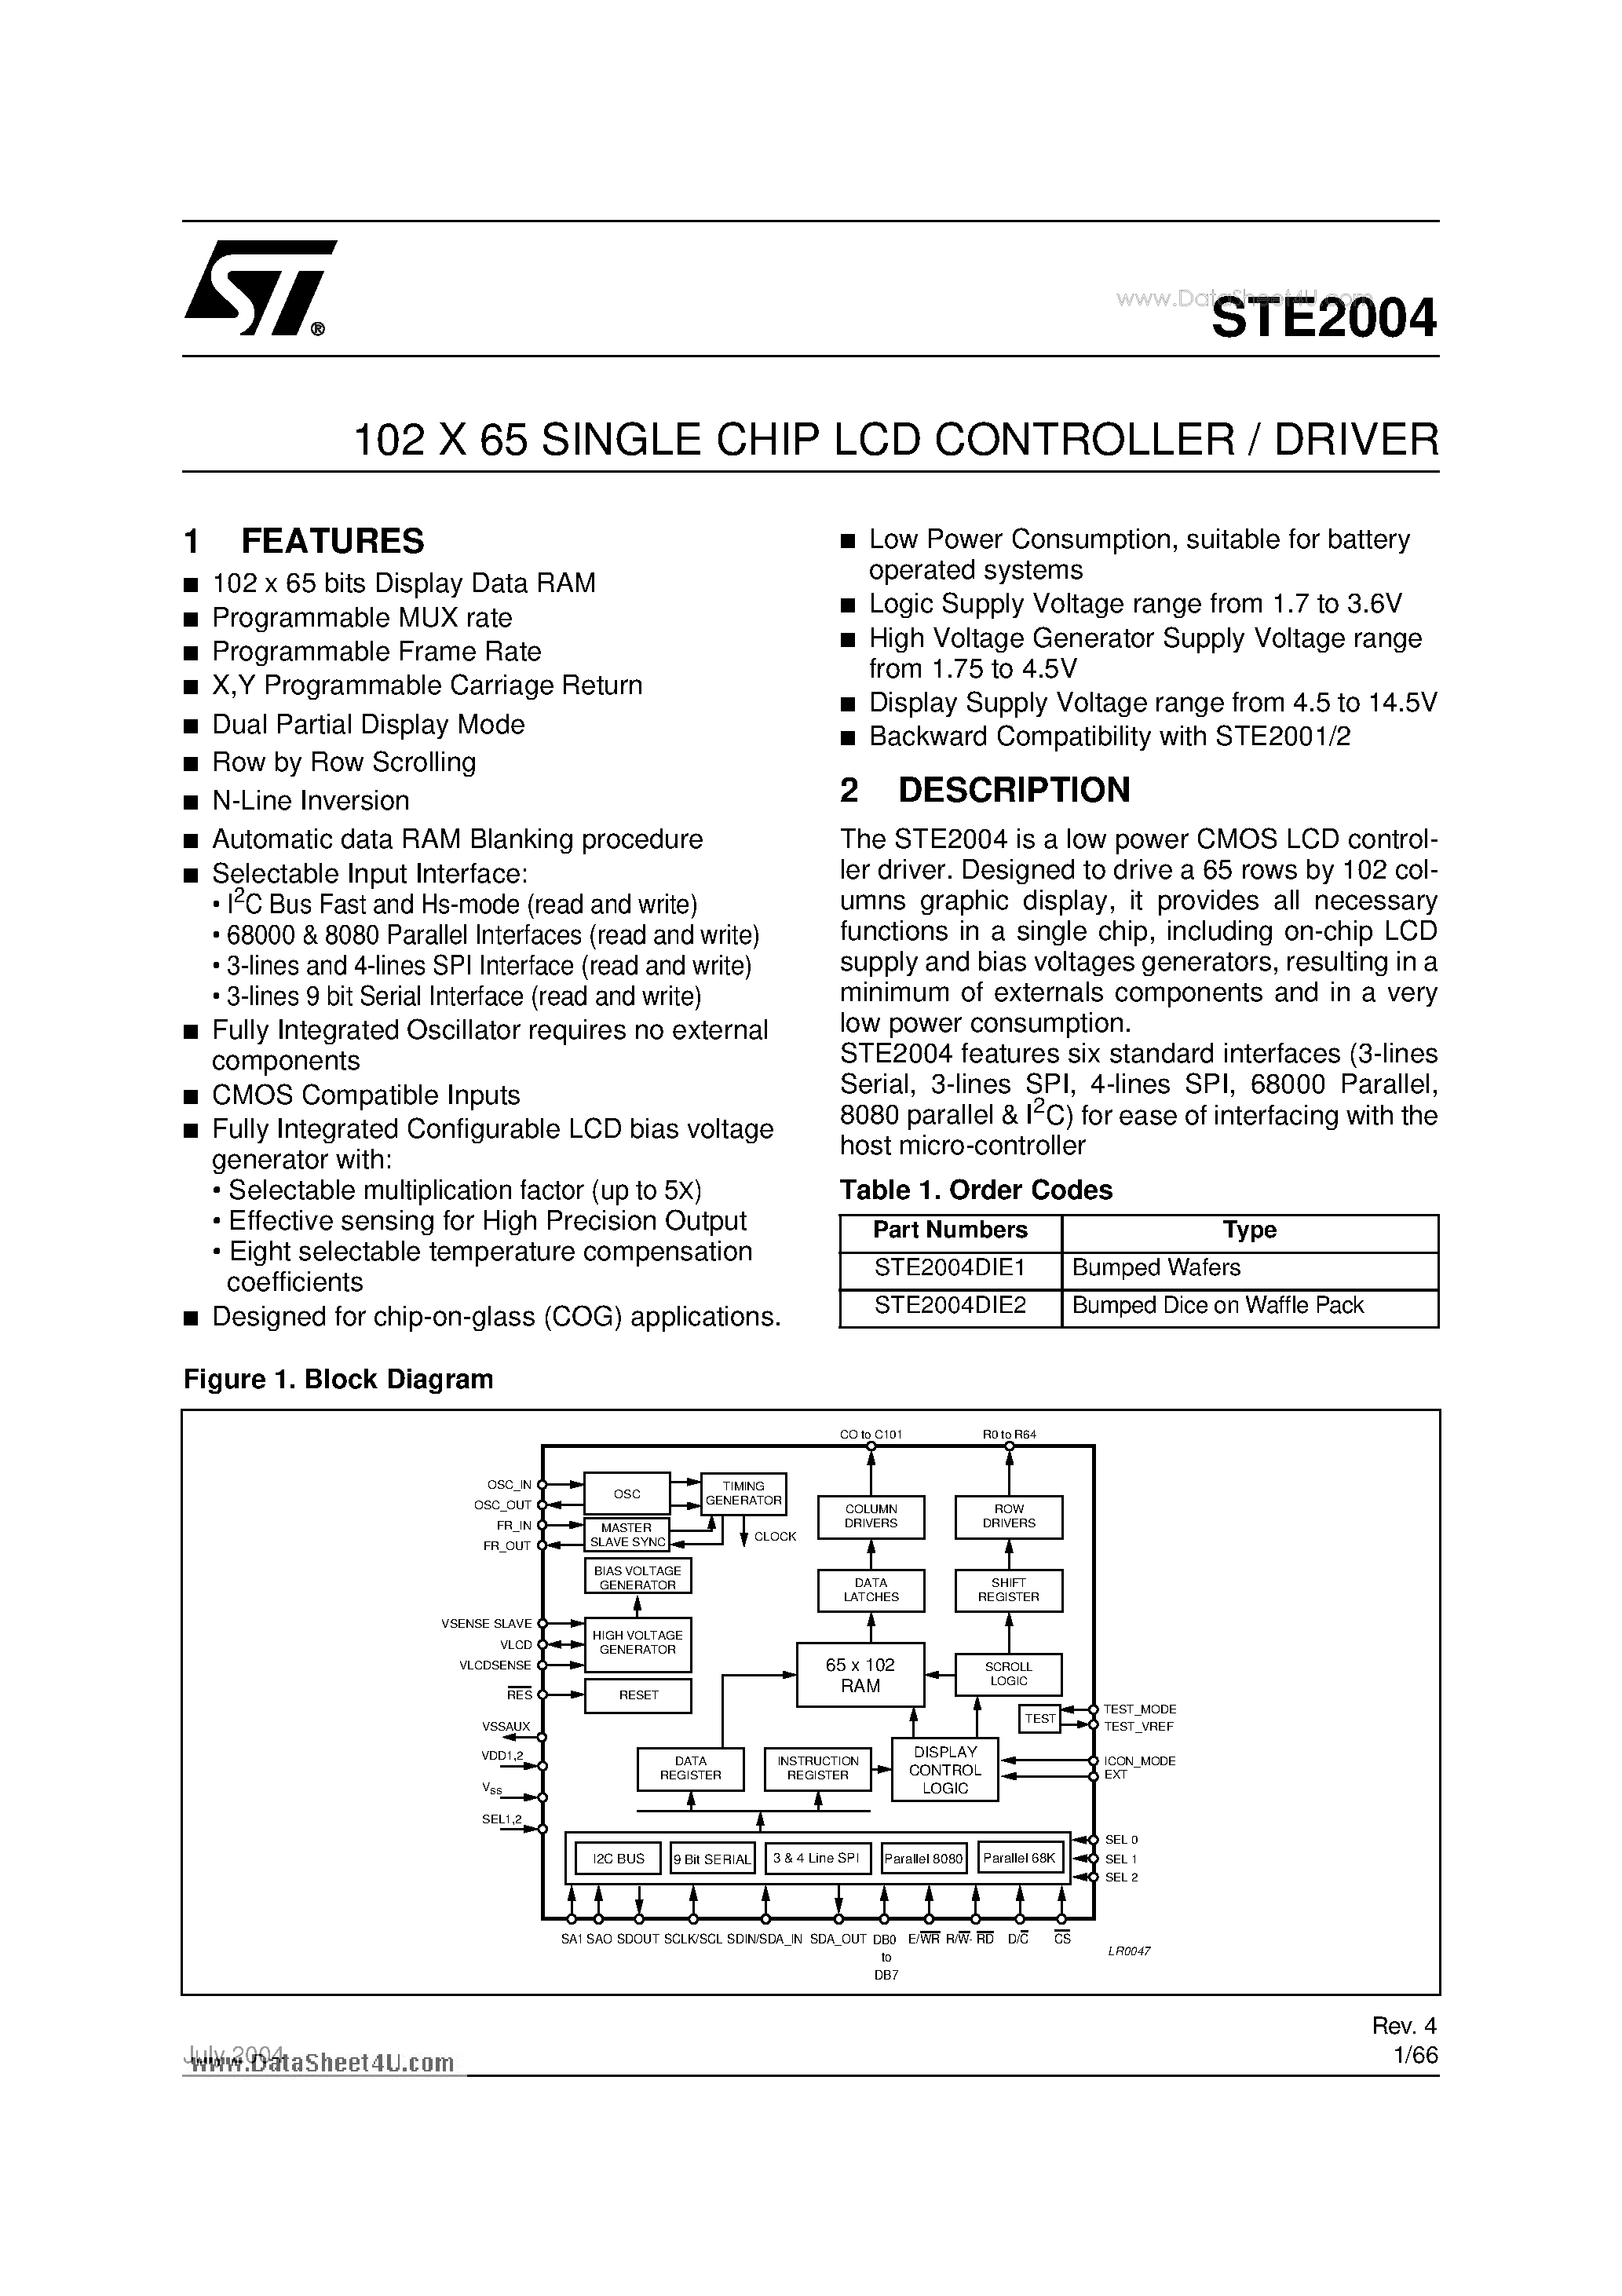 Datasheet STE2004 - 102 X 65 SINGLE CHIP LCD CONTROLLER / DRIVER page 1